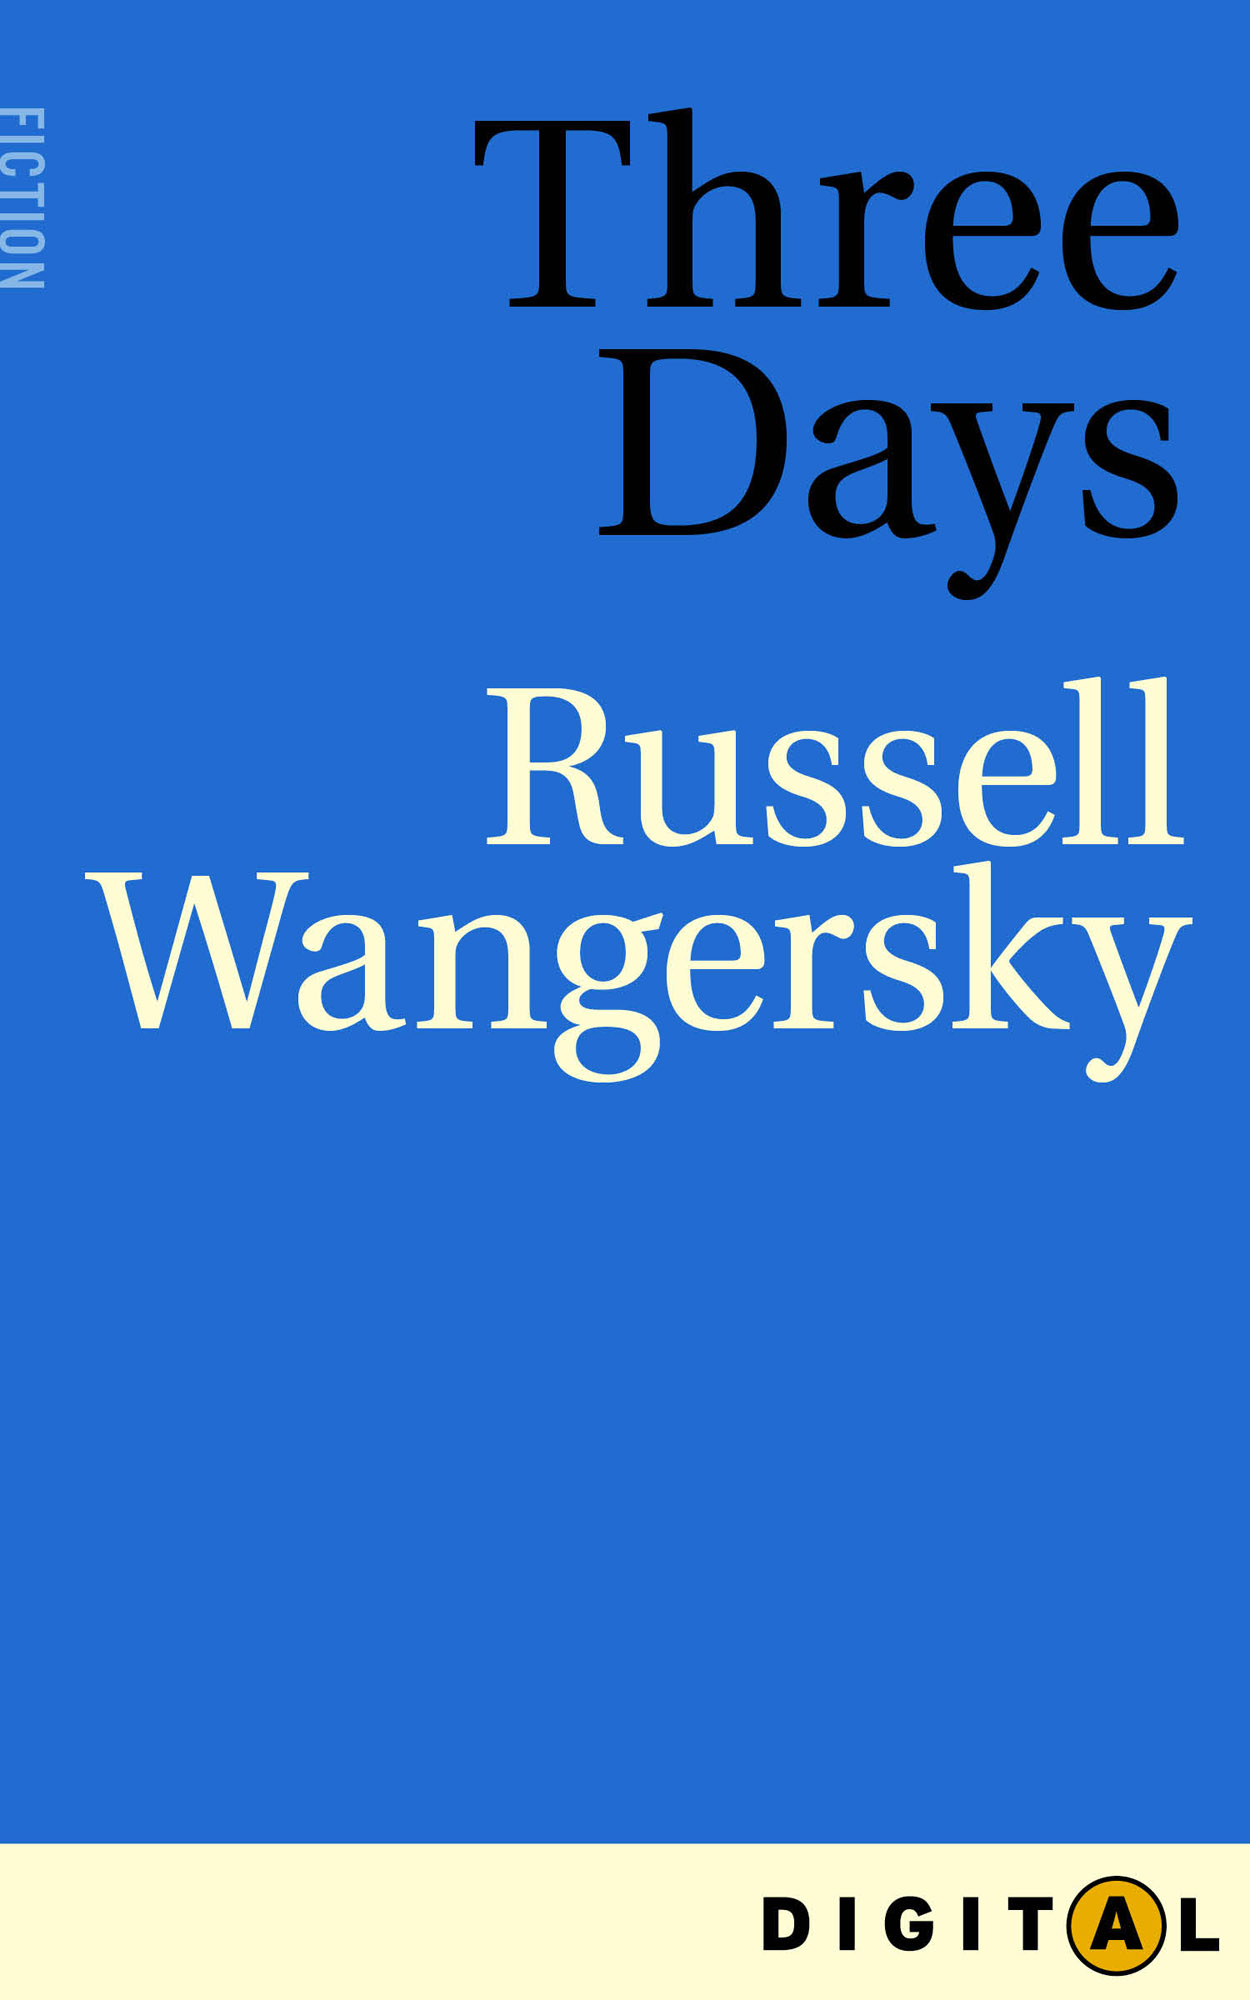 Three Days (2013) by Russell Wangersky